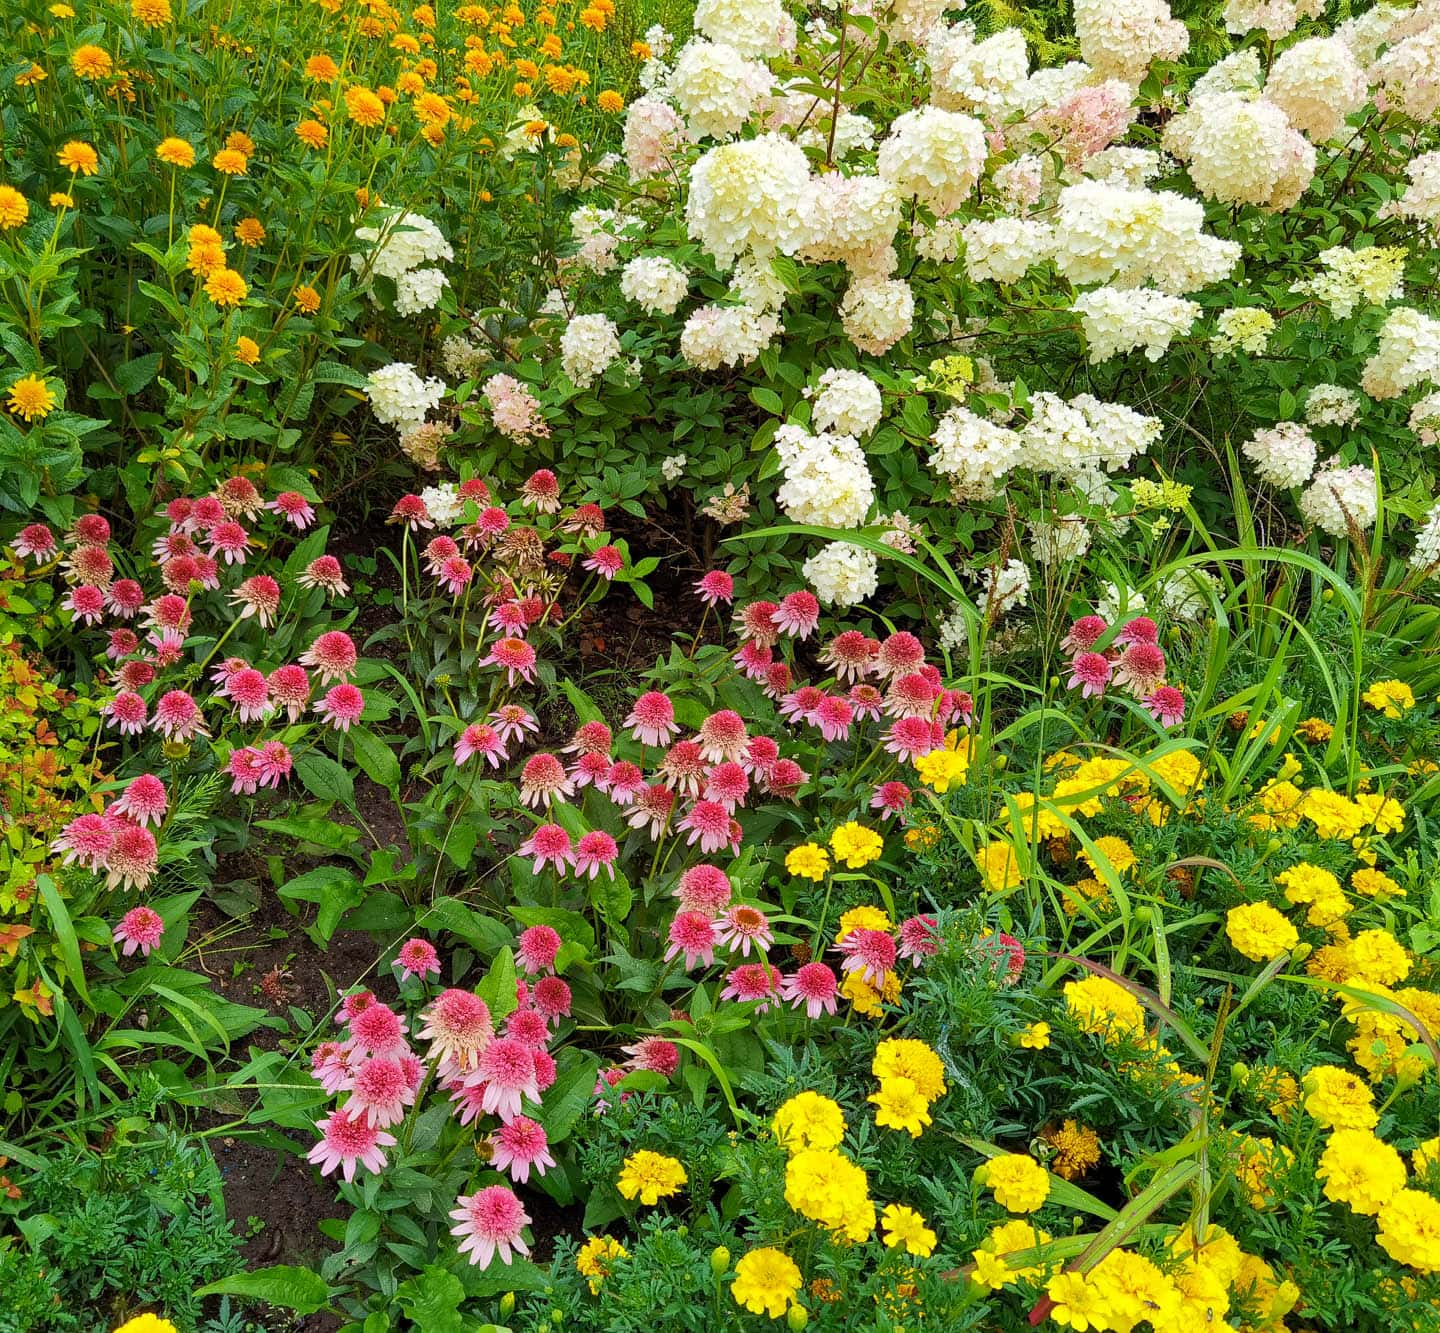 White Panicle Hydrangea with pink and yellow Echinacea growing in front of it